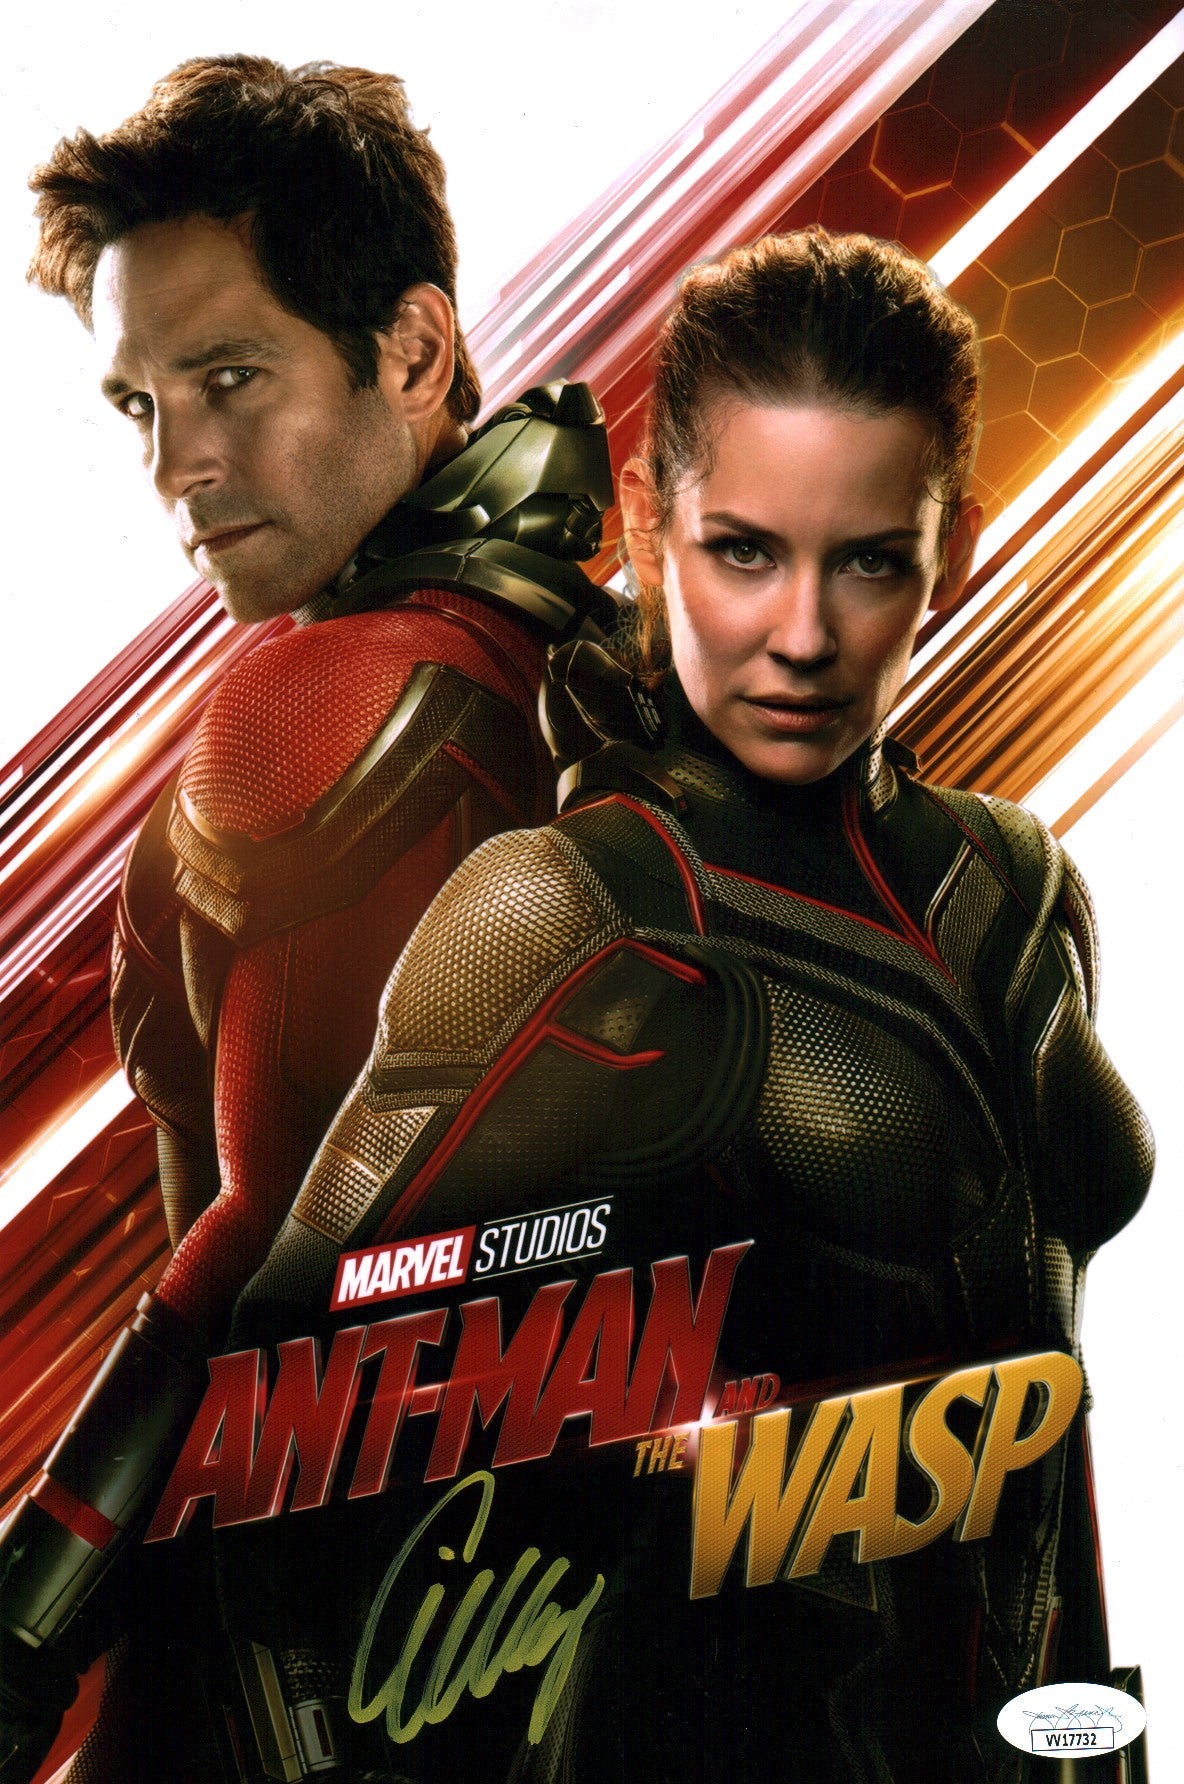 Evangeline Lilly Ant-Man and the Wasp 8x12 Signed Photo JSA Certified Autograph